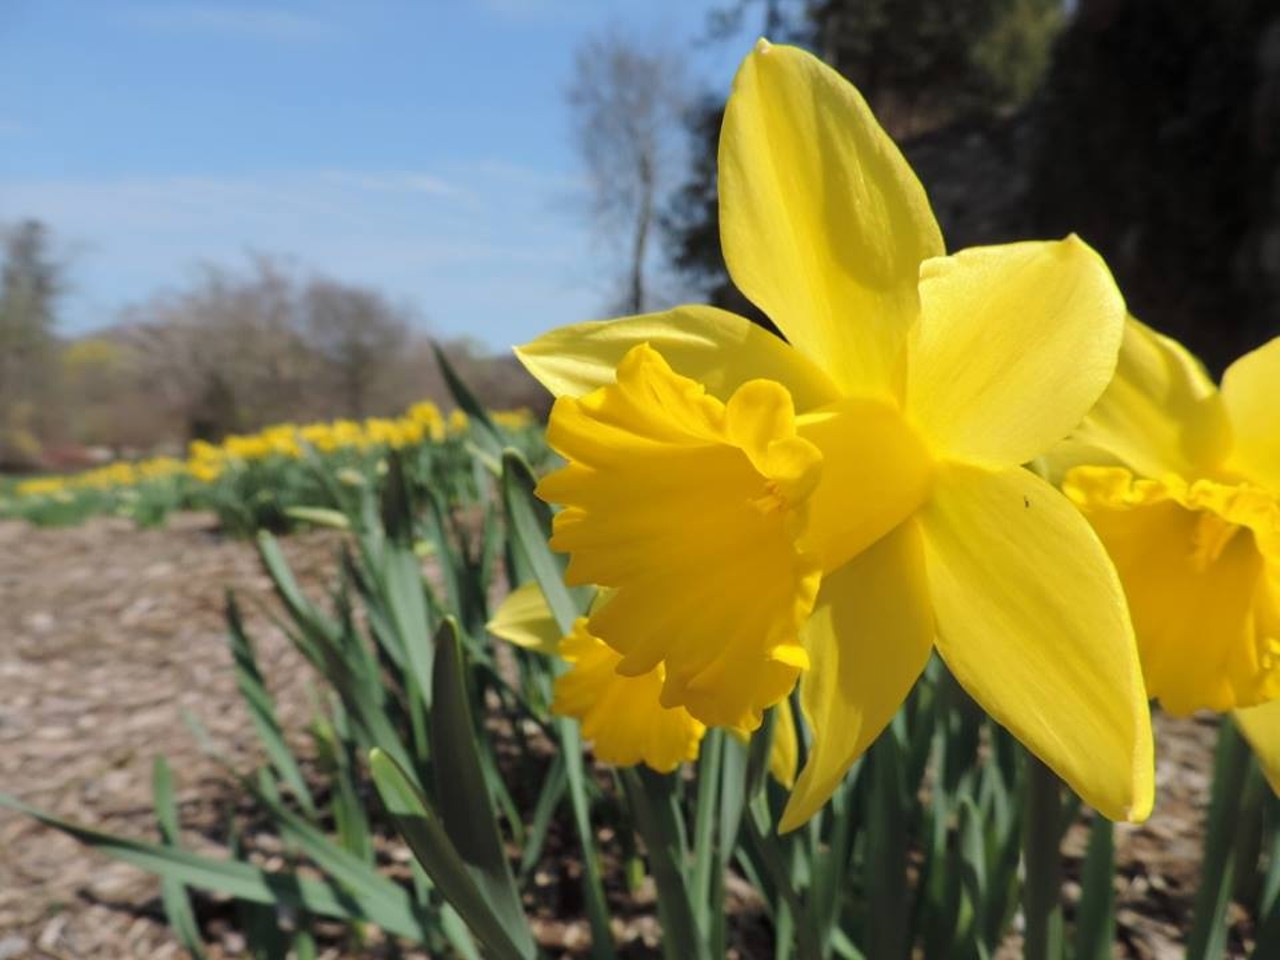 Cranbrook's daffodils look excellent this year. There's a lot to take in at Cranbrook, but their conservatory and botanical gardens are good place to start.
Photo via Cranbrook Facebook page